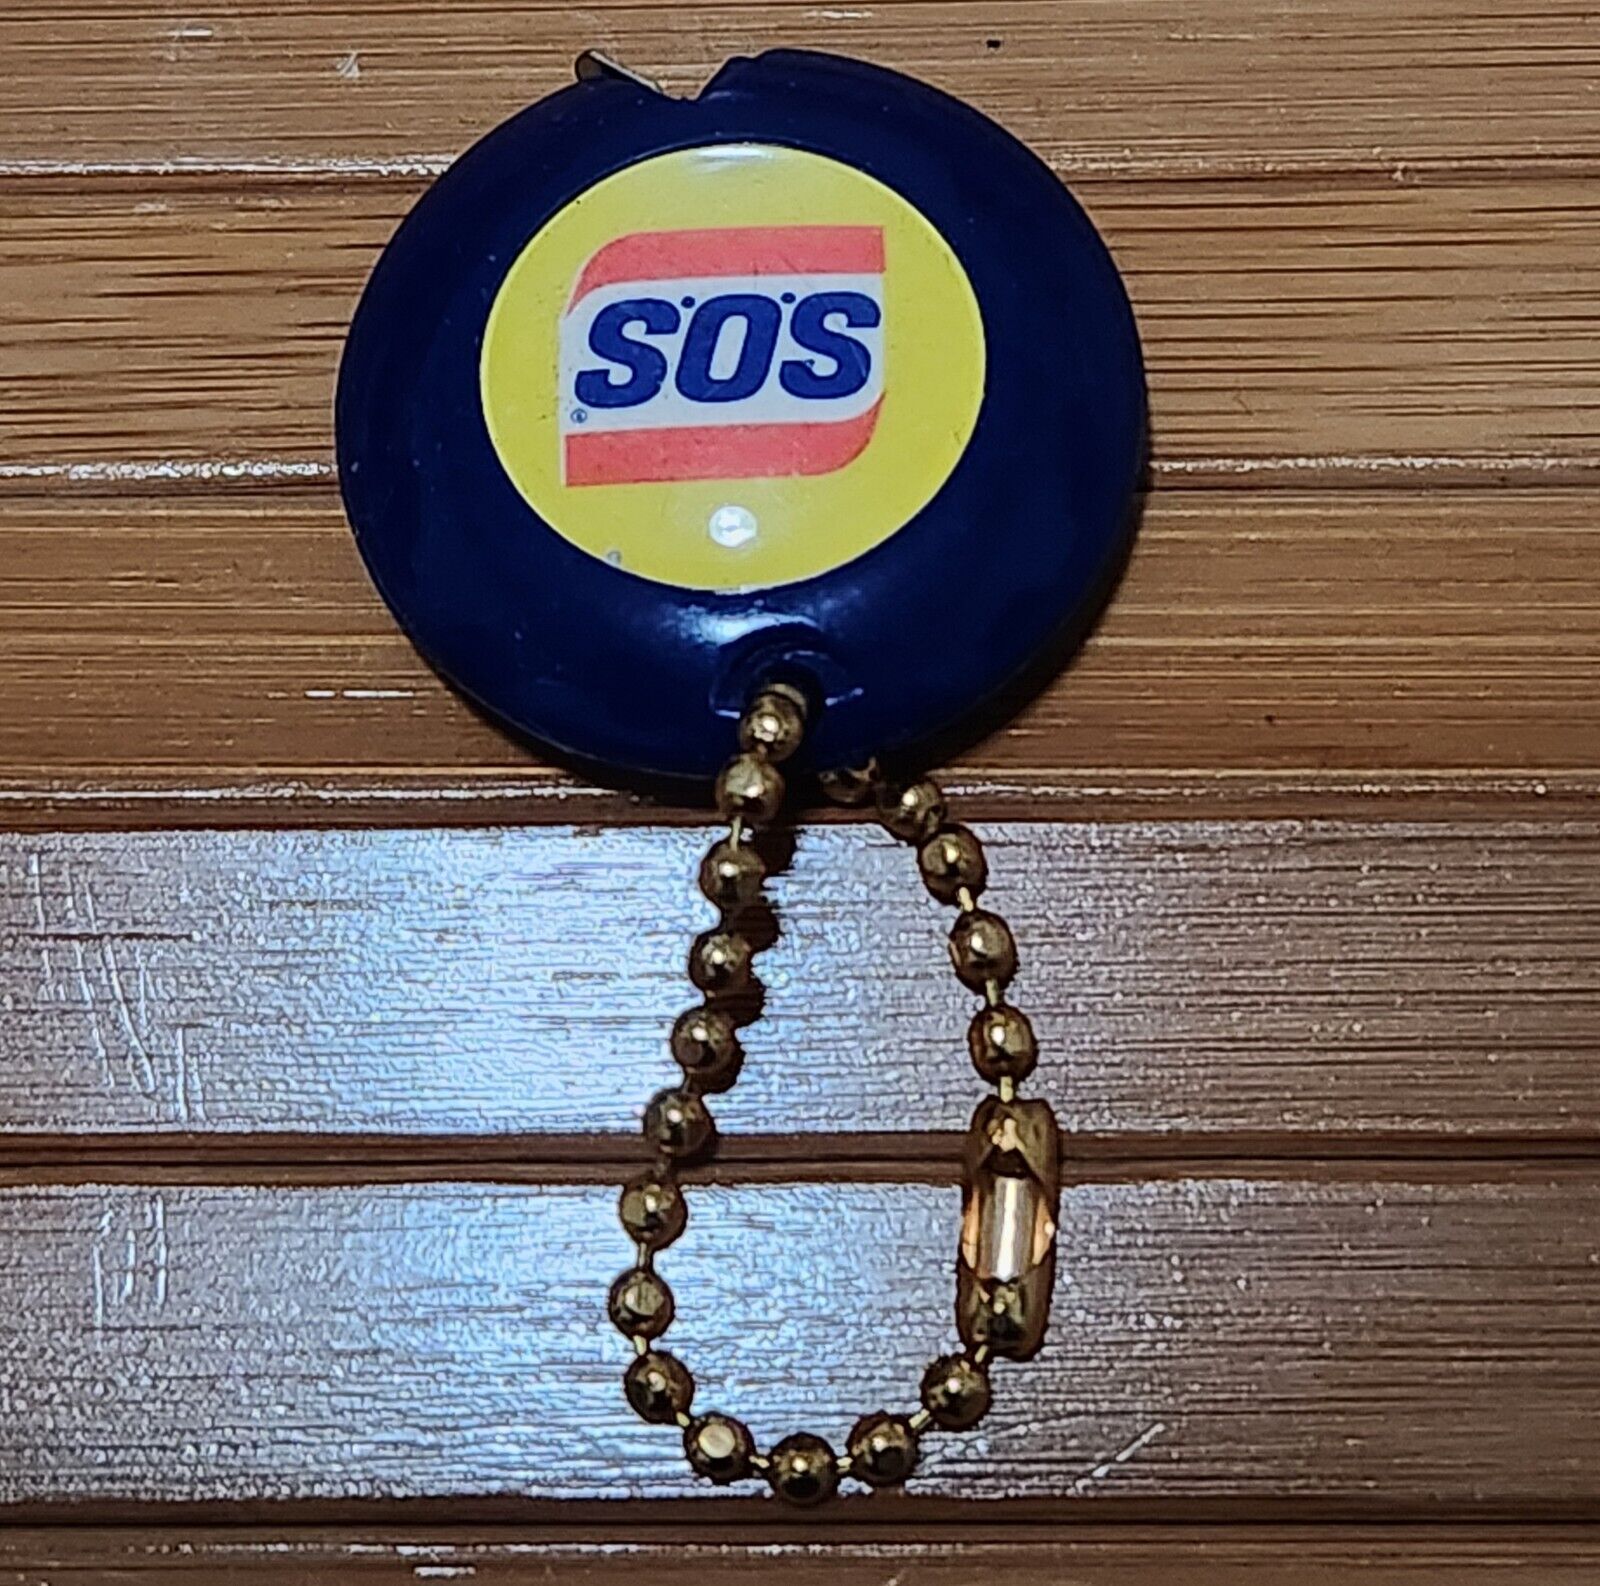 Vintage S.O.S SOS Pad Brand Keychain / Tape Measure NOS - Made in USA